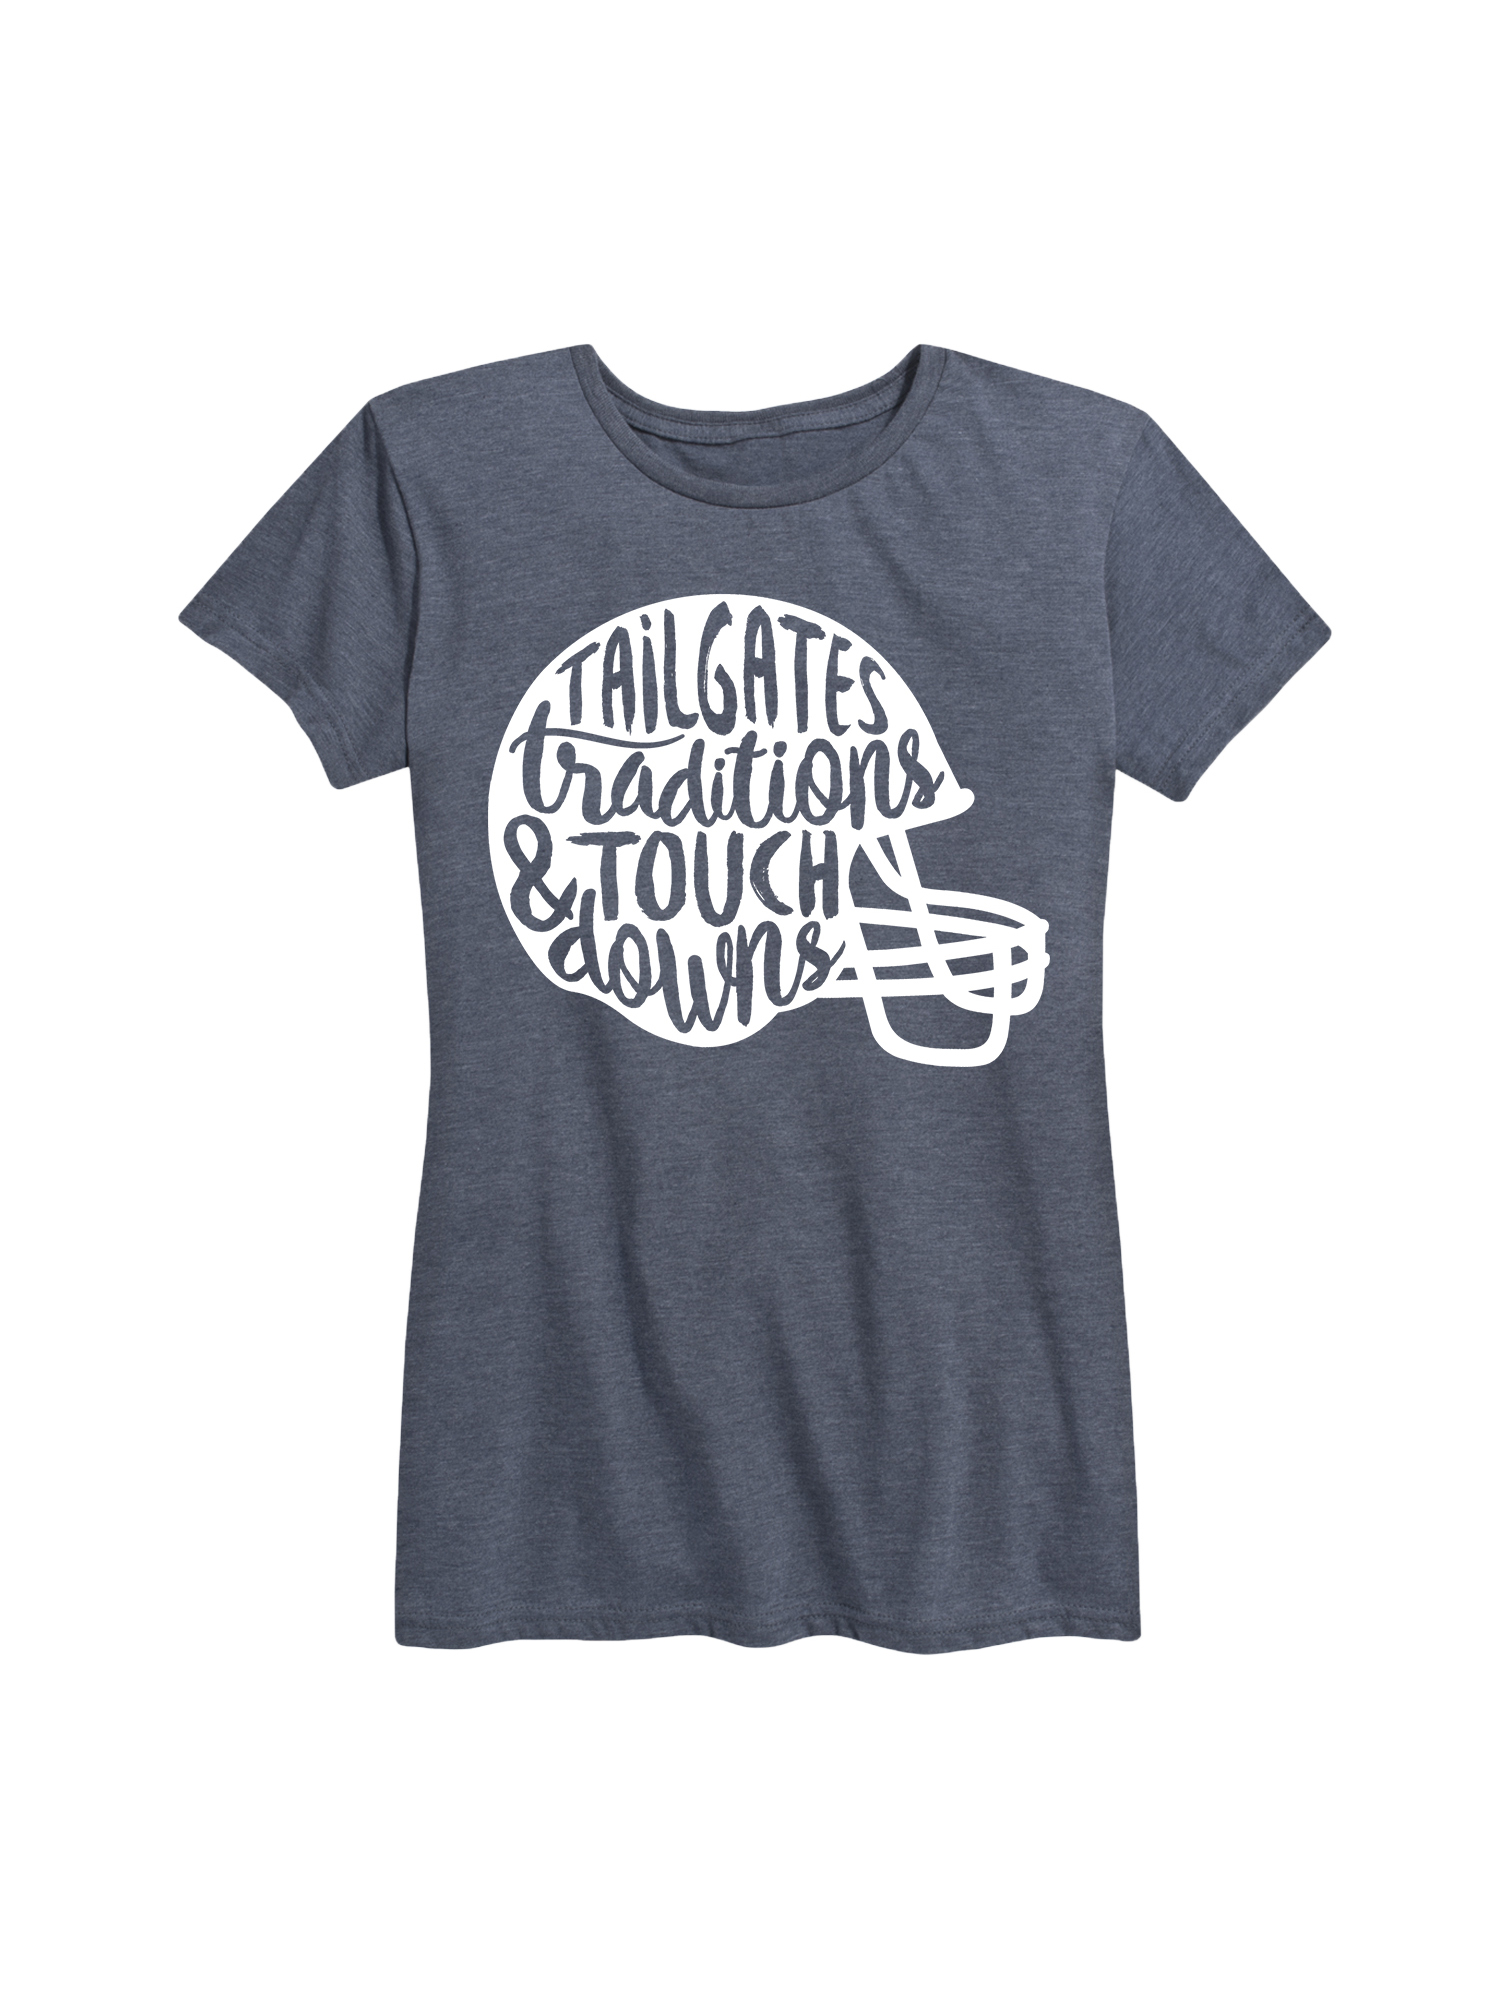 Tailgates Traditions /& Touch Downs T-Shirt